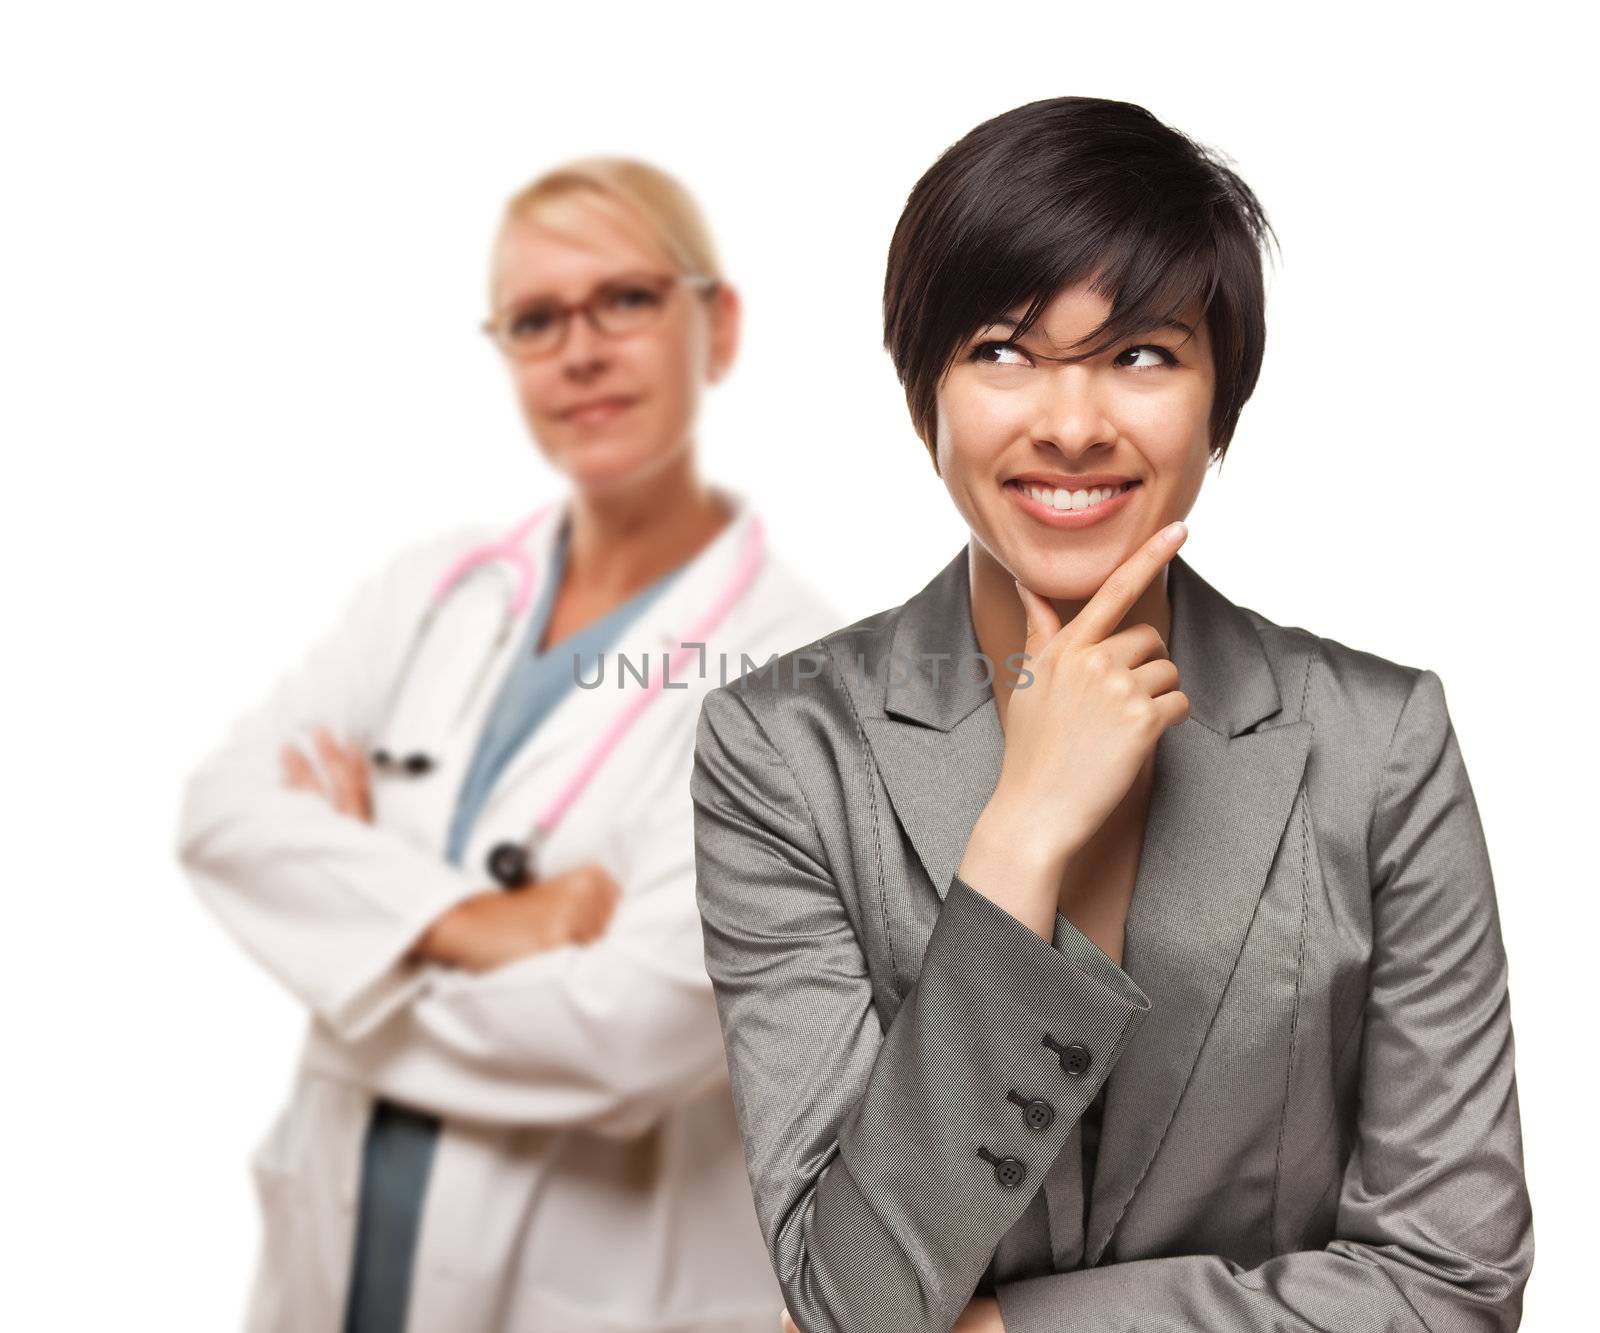 Young Multiethnic Woman and Female Doctor Isolated on a White Background.